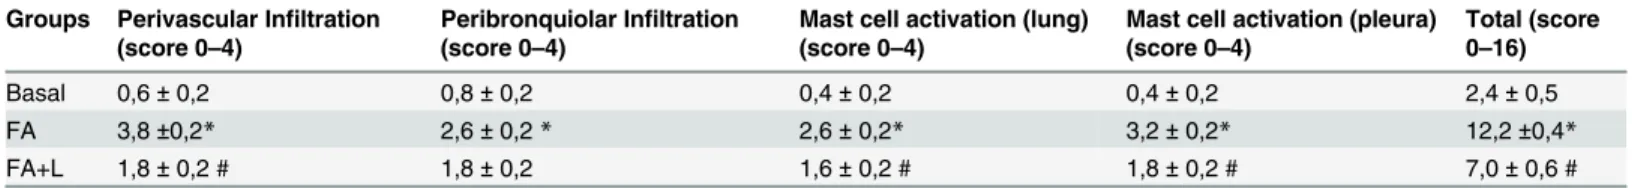 Table 1. Effect of treatment with LLLT on leukocytes infiltration and mast cell activation after FA exposure.